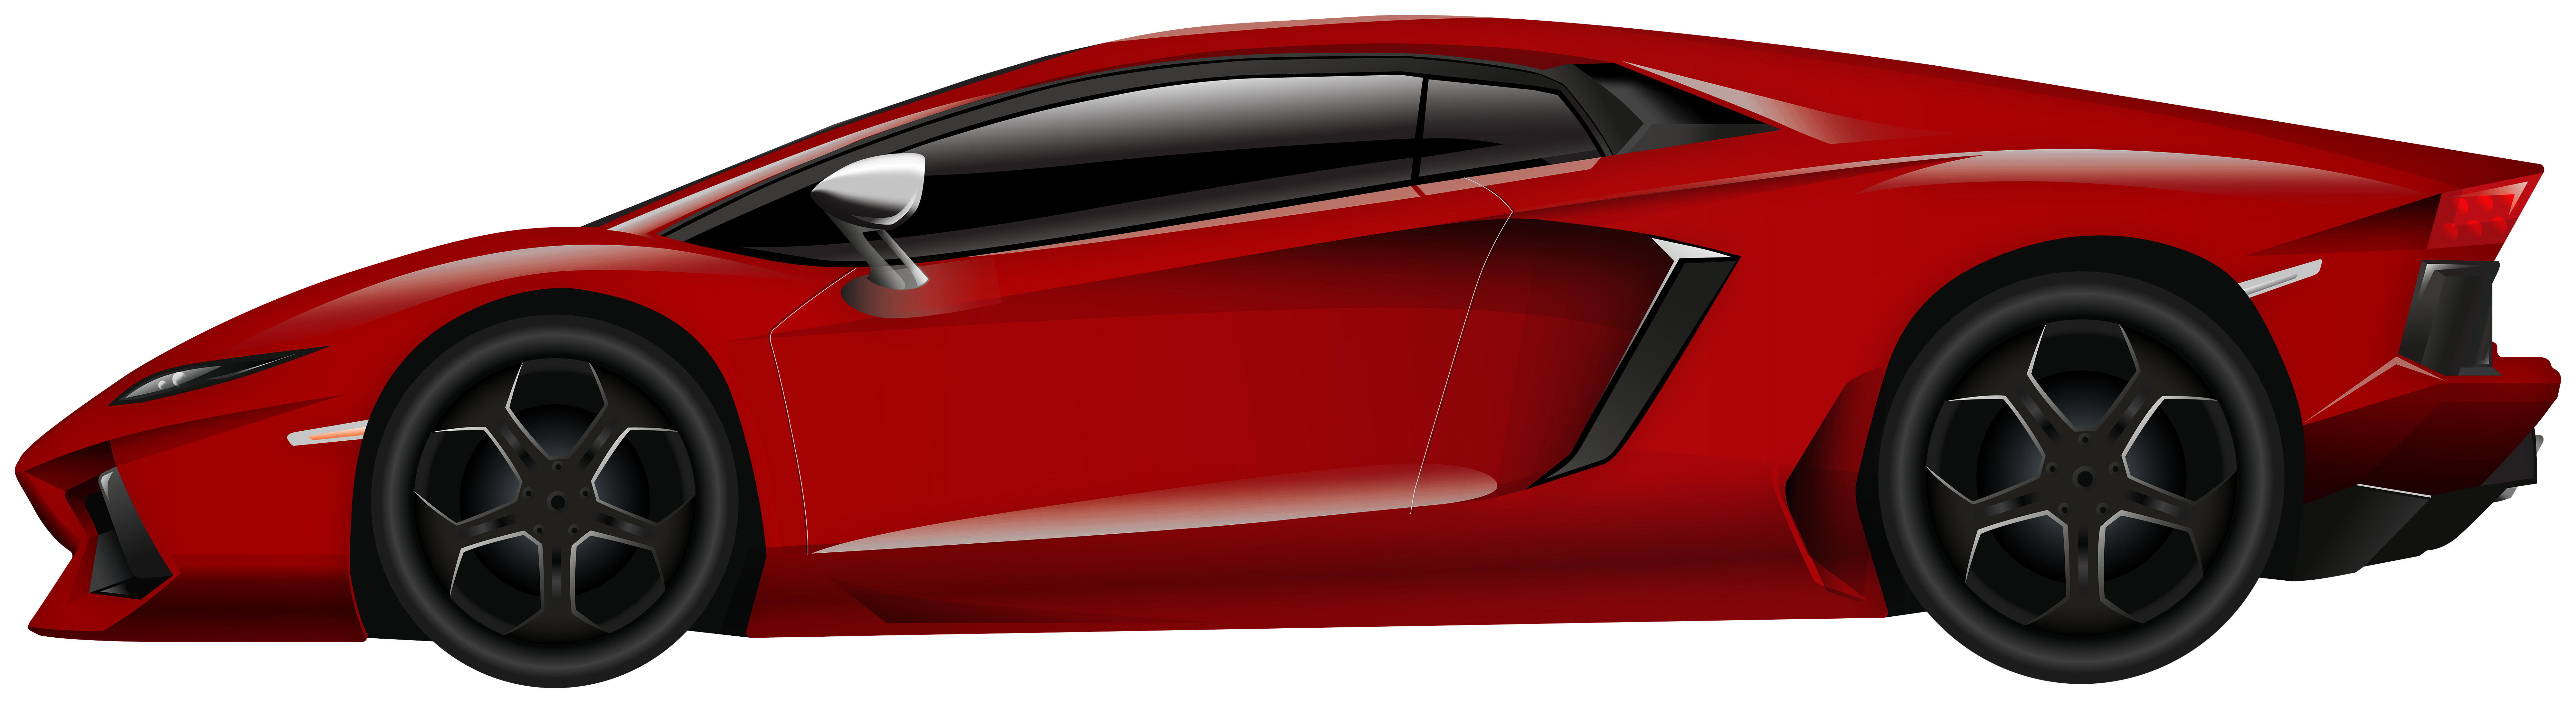 Red Sport Car Png Clipart Best Web Clipart